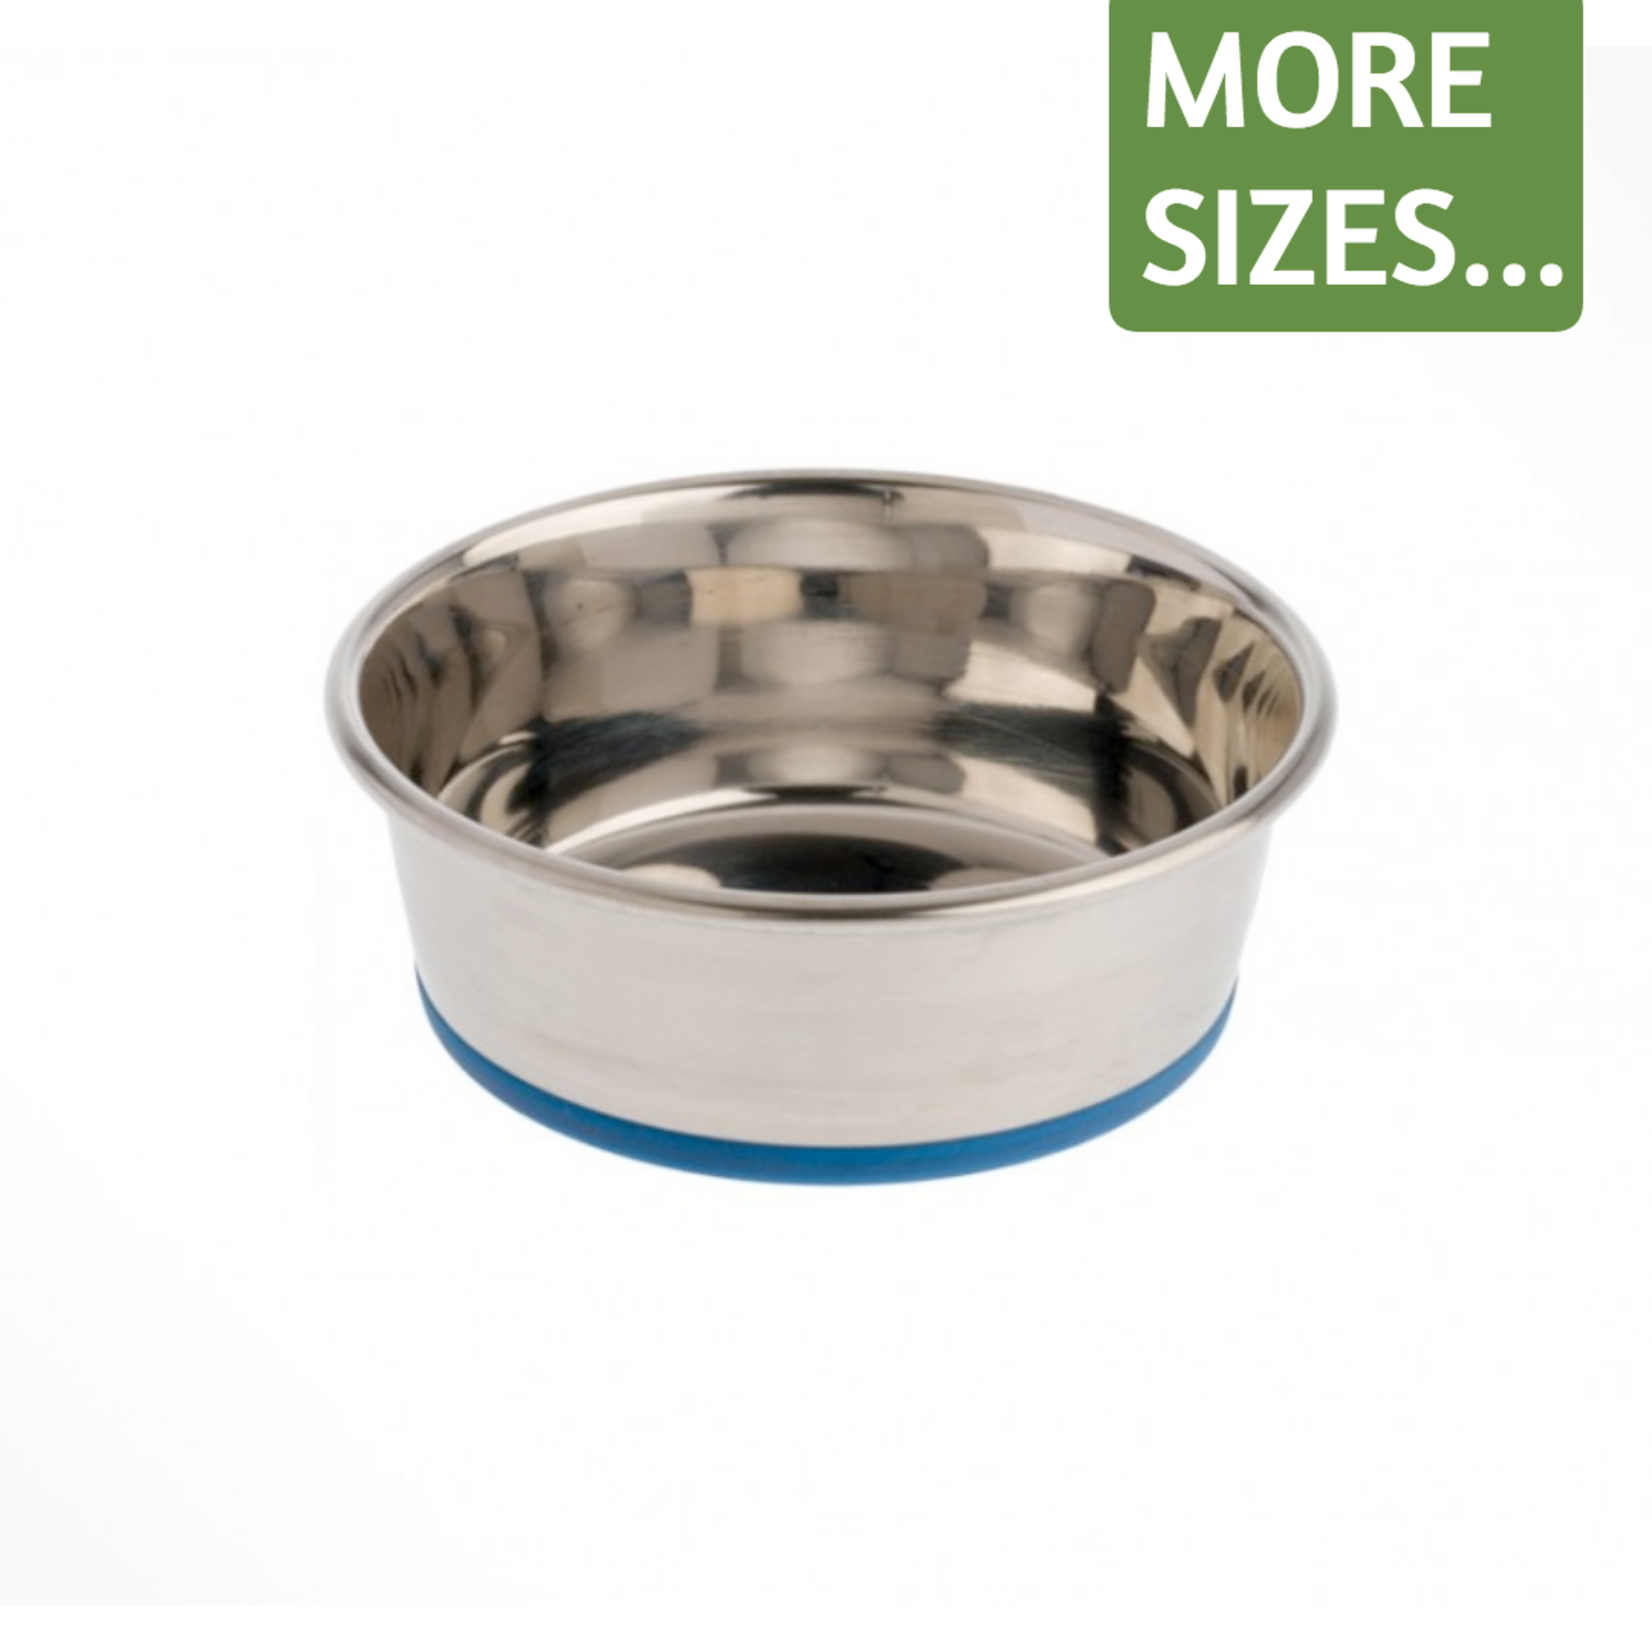 OurPets by Cosmic OurPets Durapet Premium Rubber-Bonded Stainless Steel Bowl